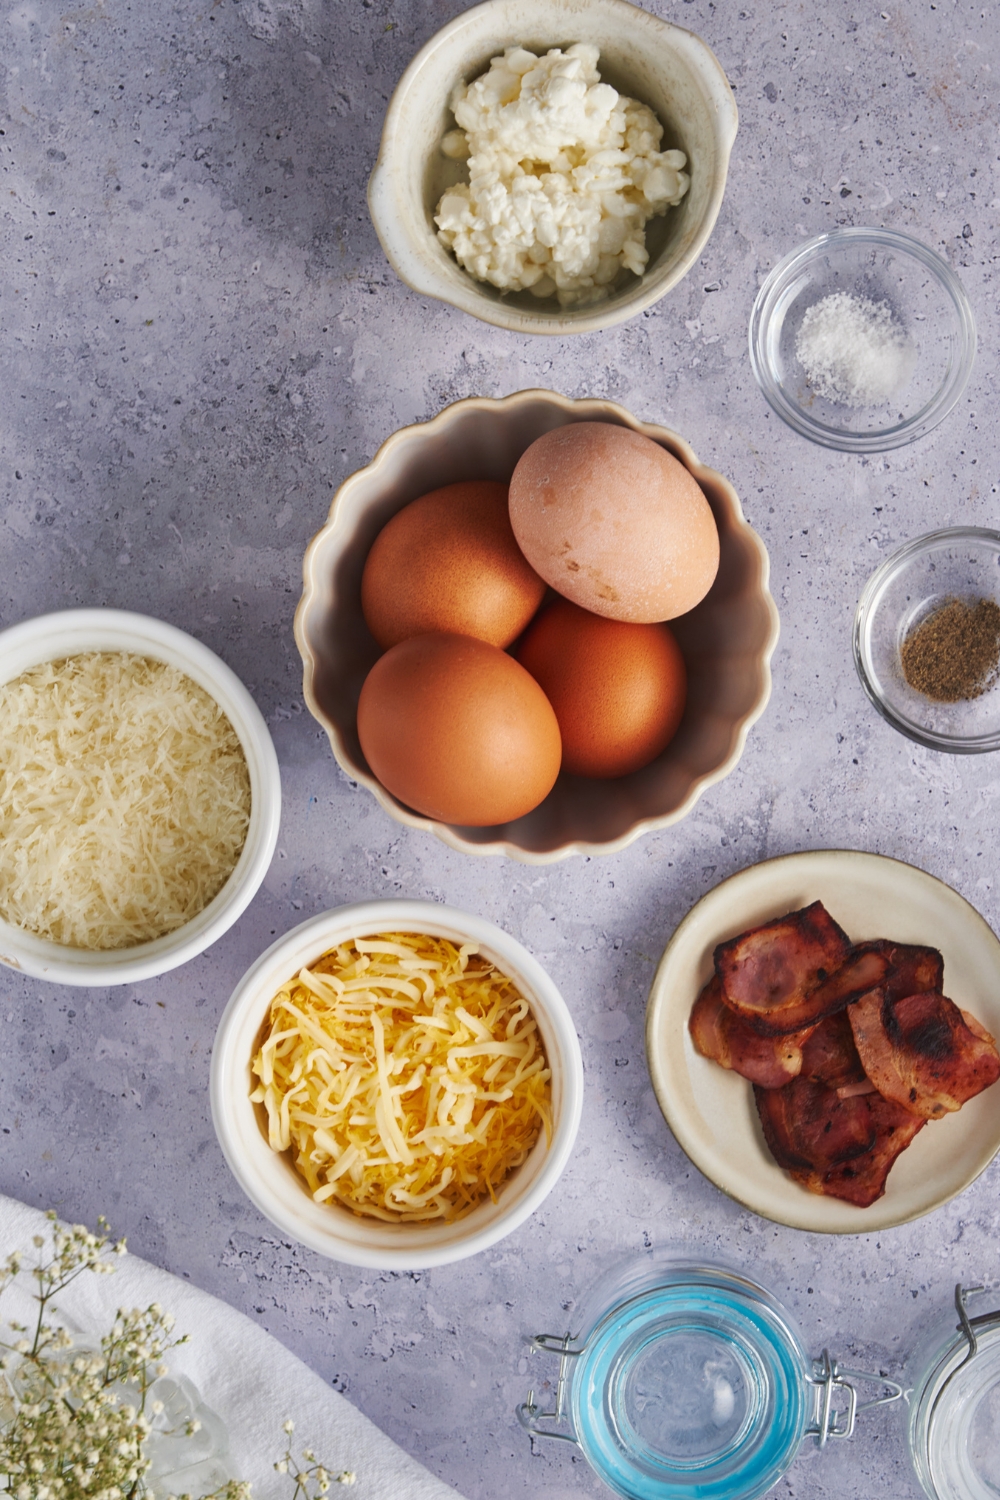 An overhead view of a bowl with whole eggs, a small bowl with cooked bacon, and three small bowls with various cheeses.